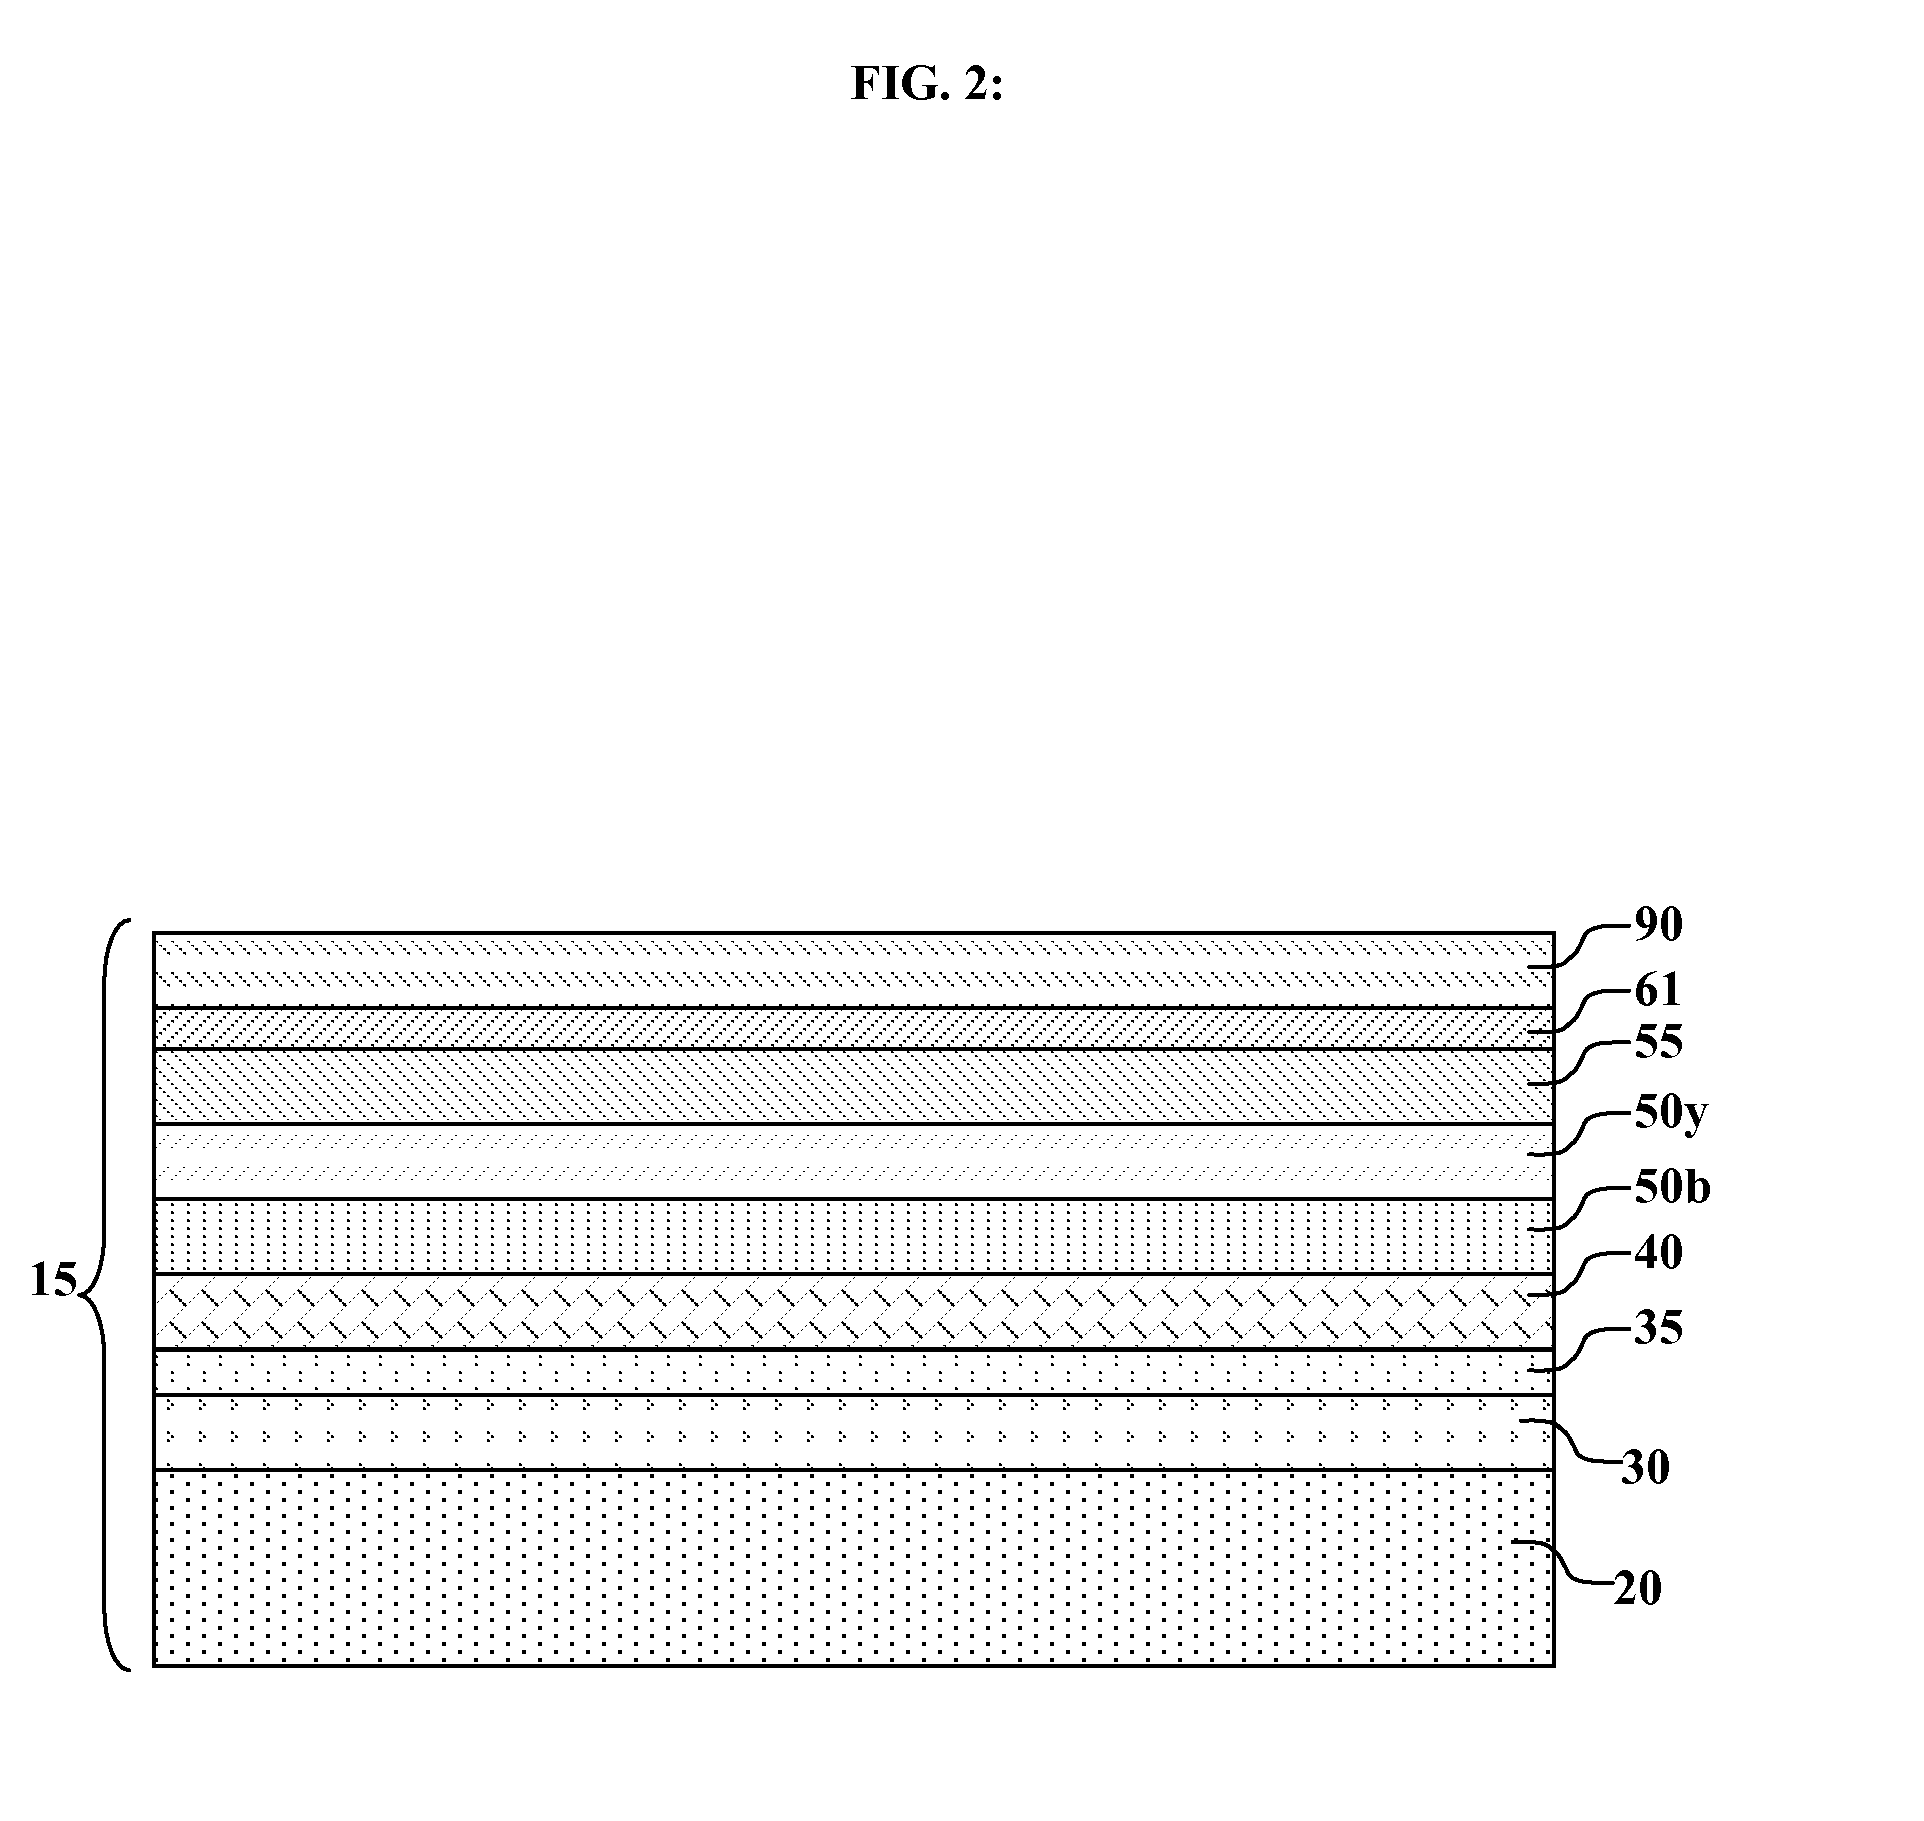 Inverted OLED device with improved efficiency